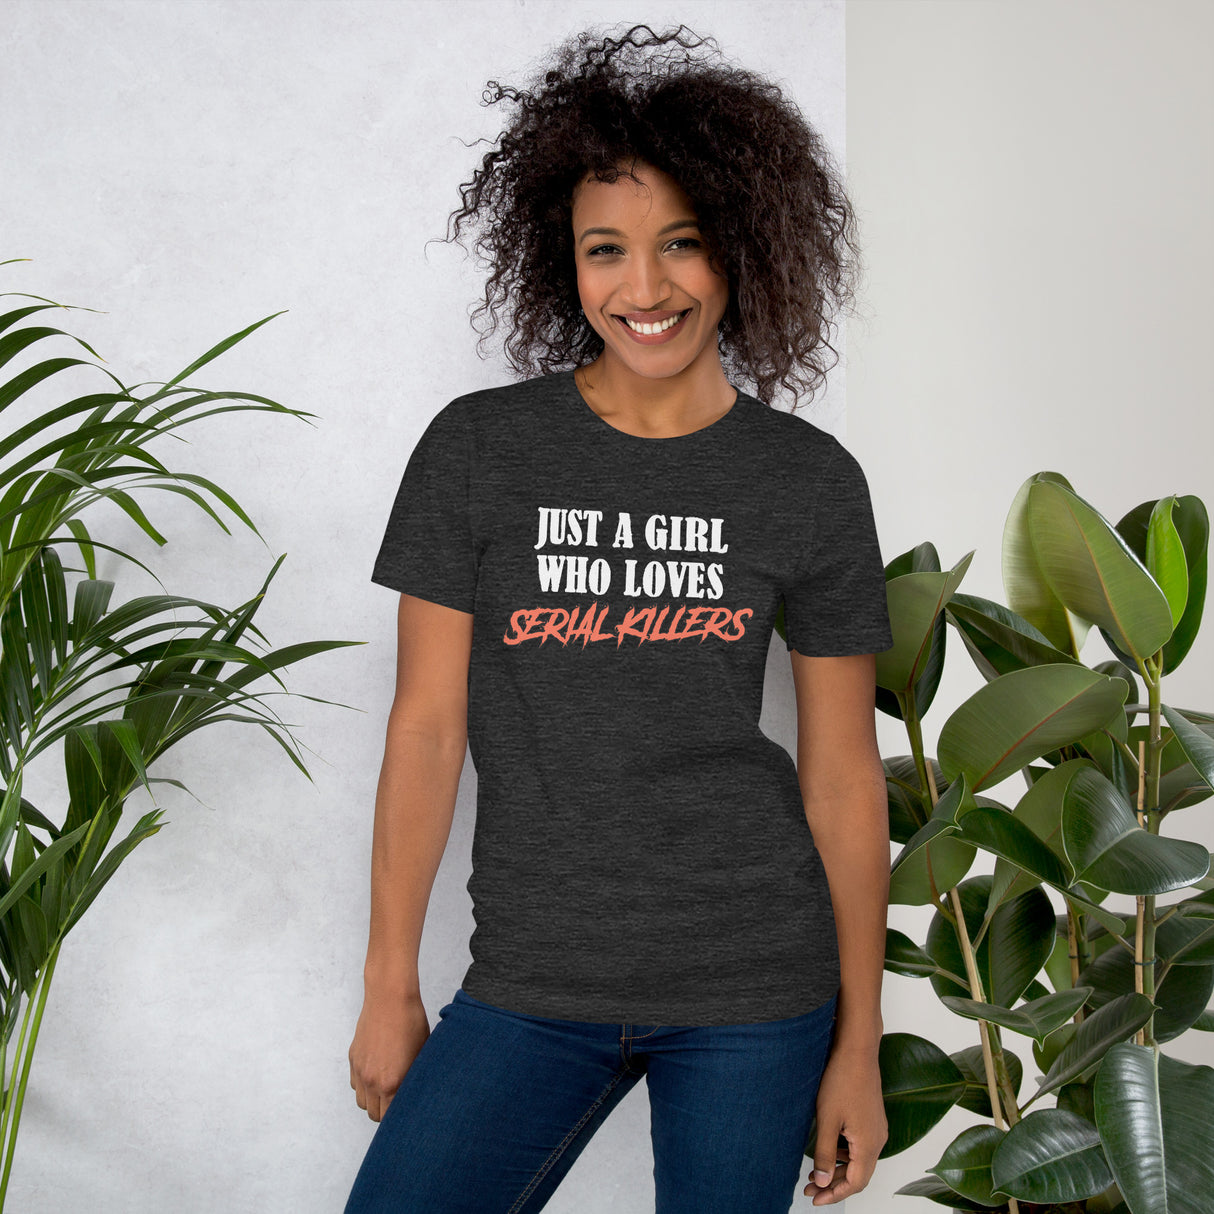 Just A Girl Who Loves Serial Killers Women's Shirt